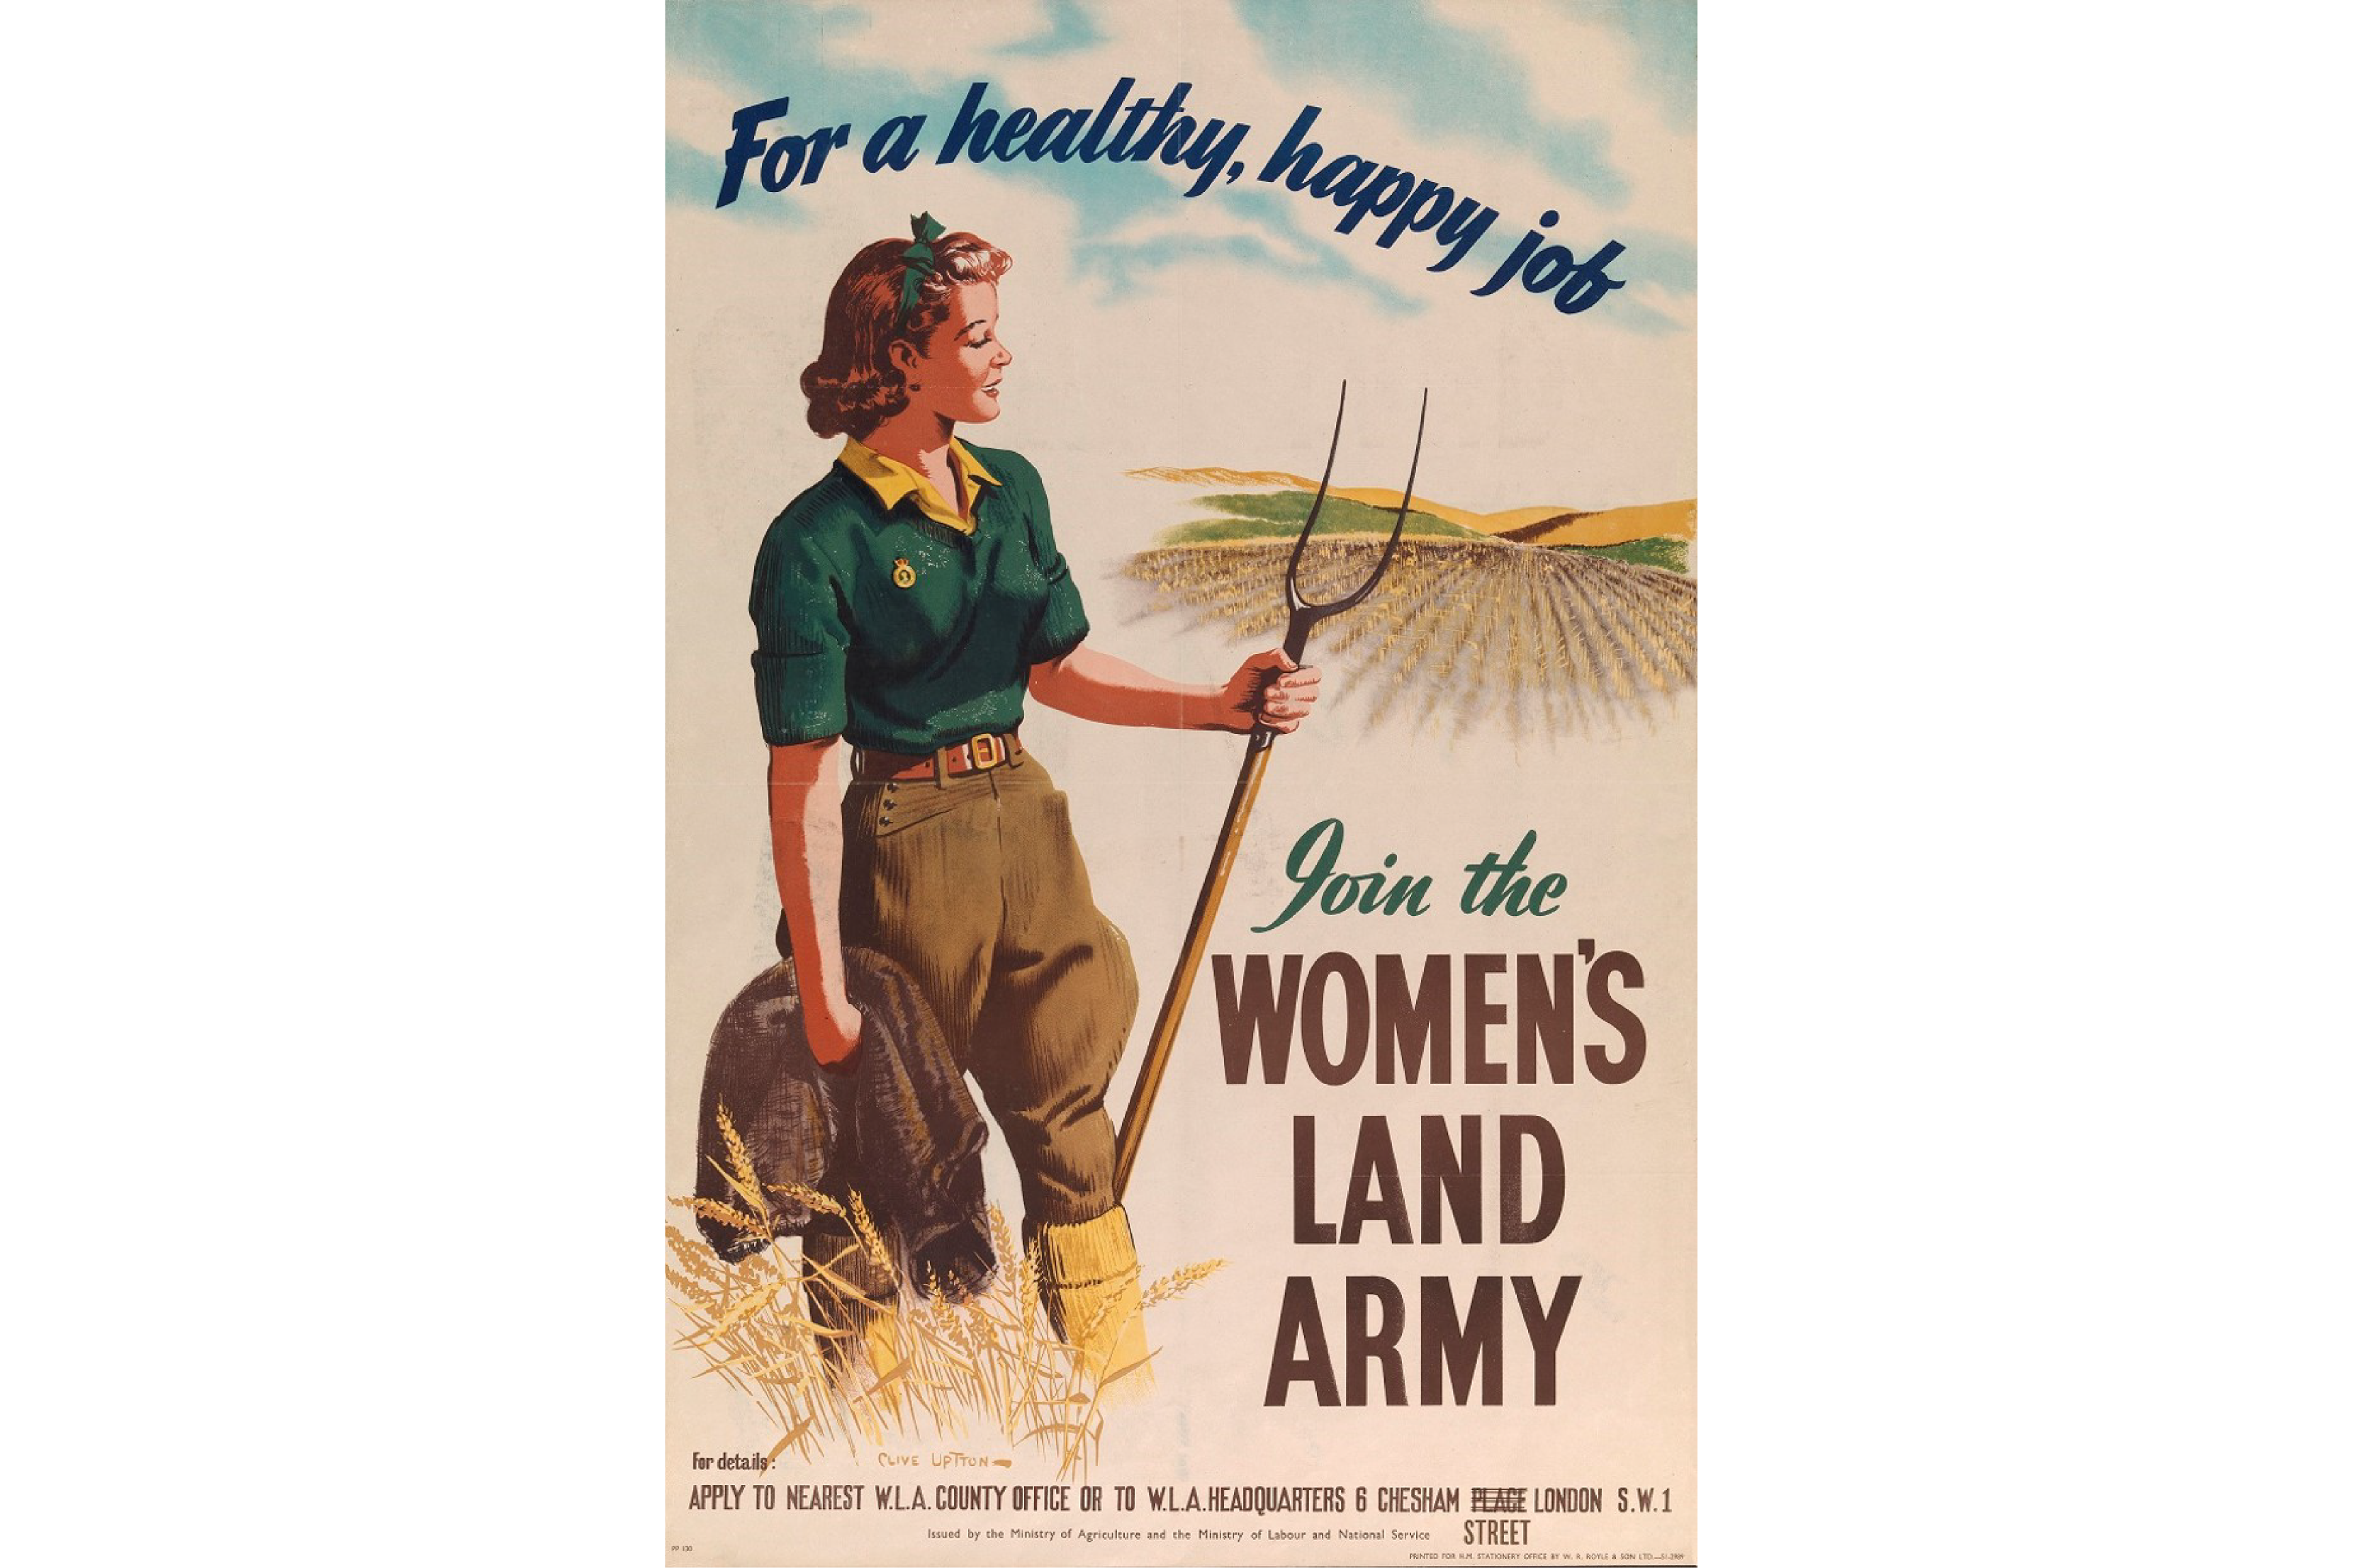 Image: War poster. Permission for non-commercial use courtesy of the Imperial War Museum, London.